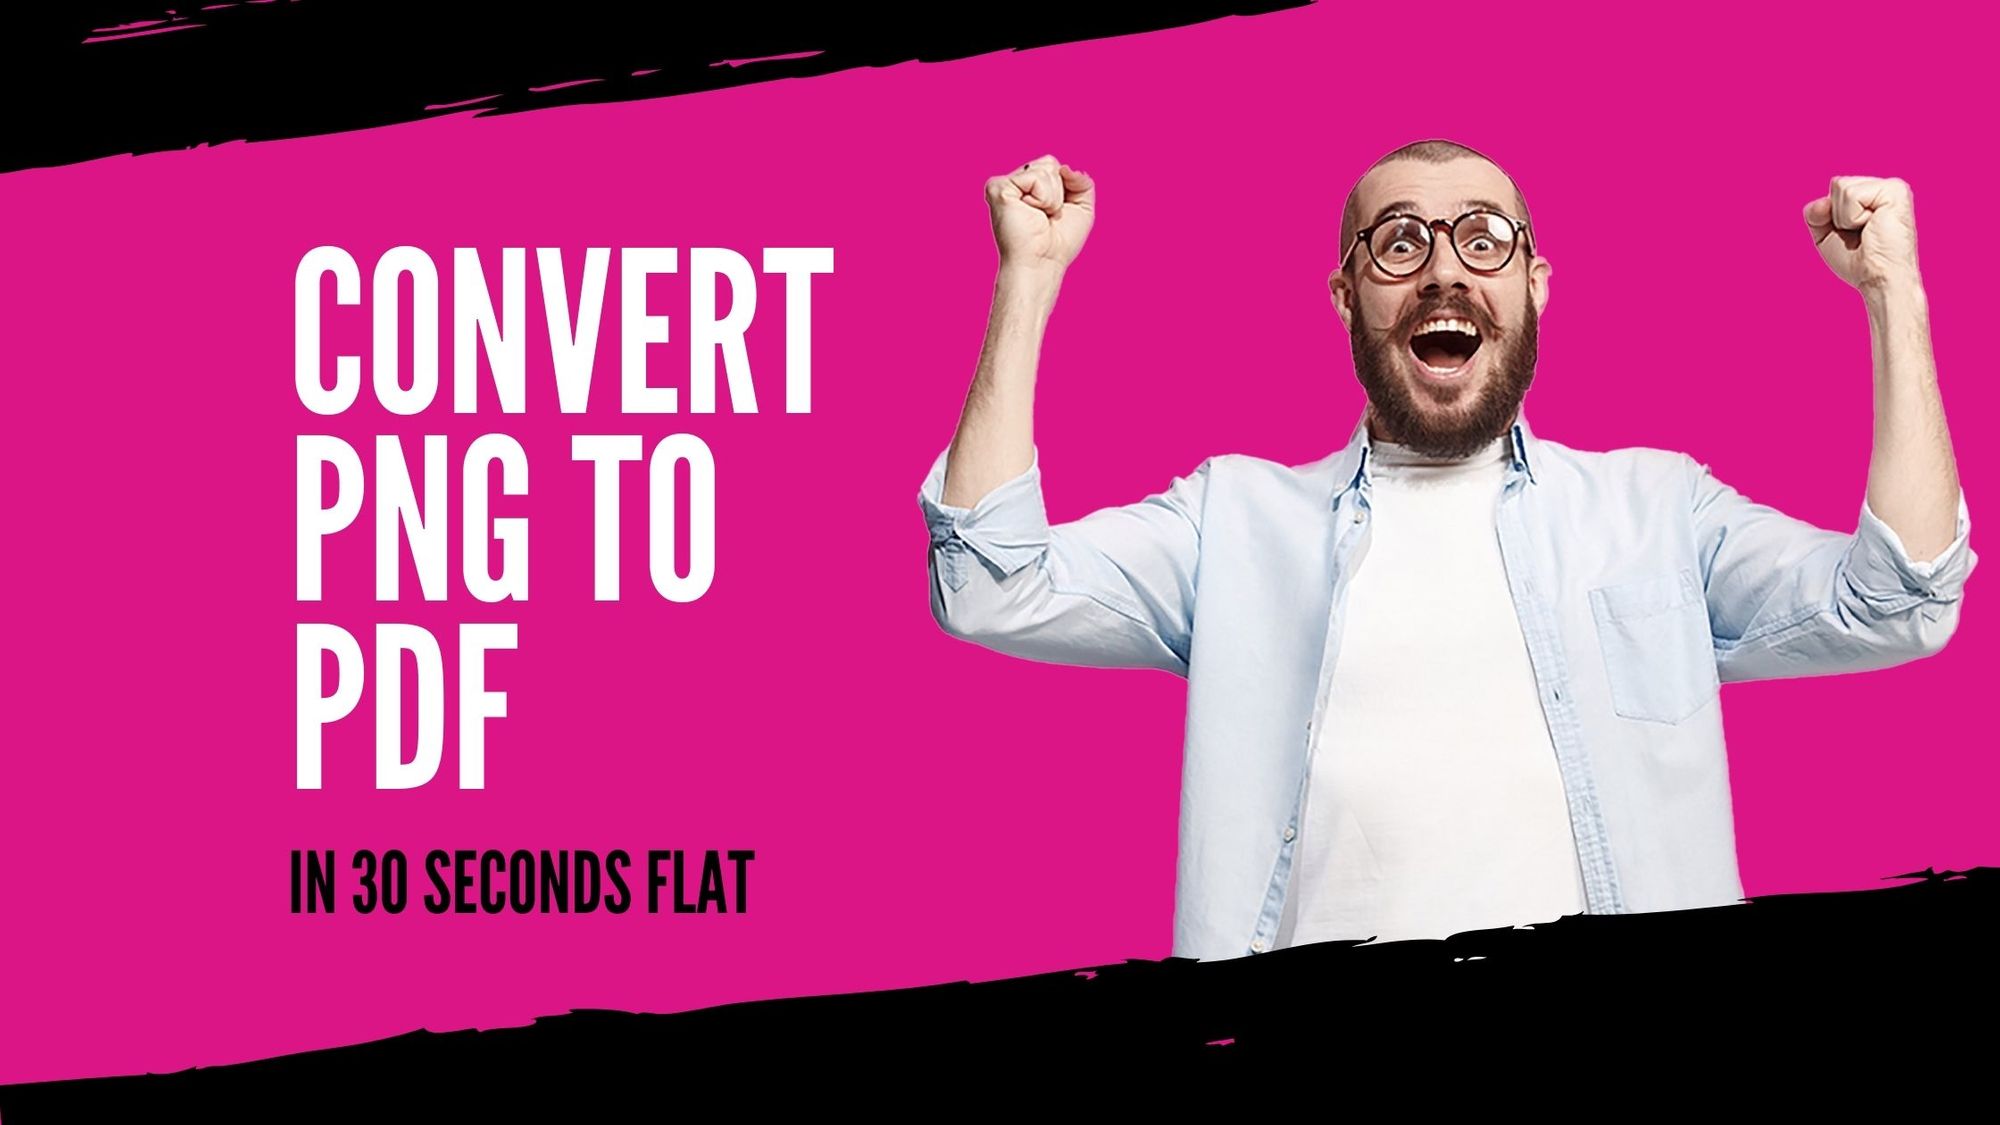 How to Convert PNG to PDF - In 30 Seconds Flat